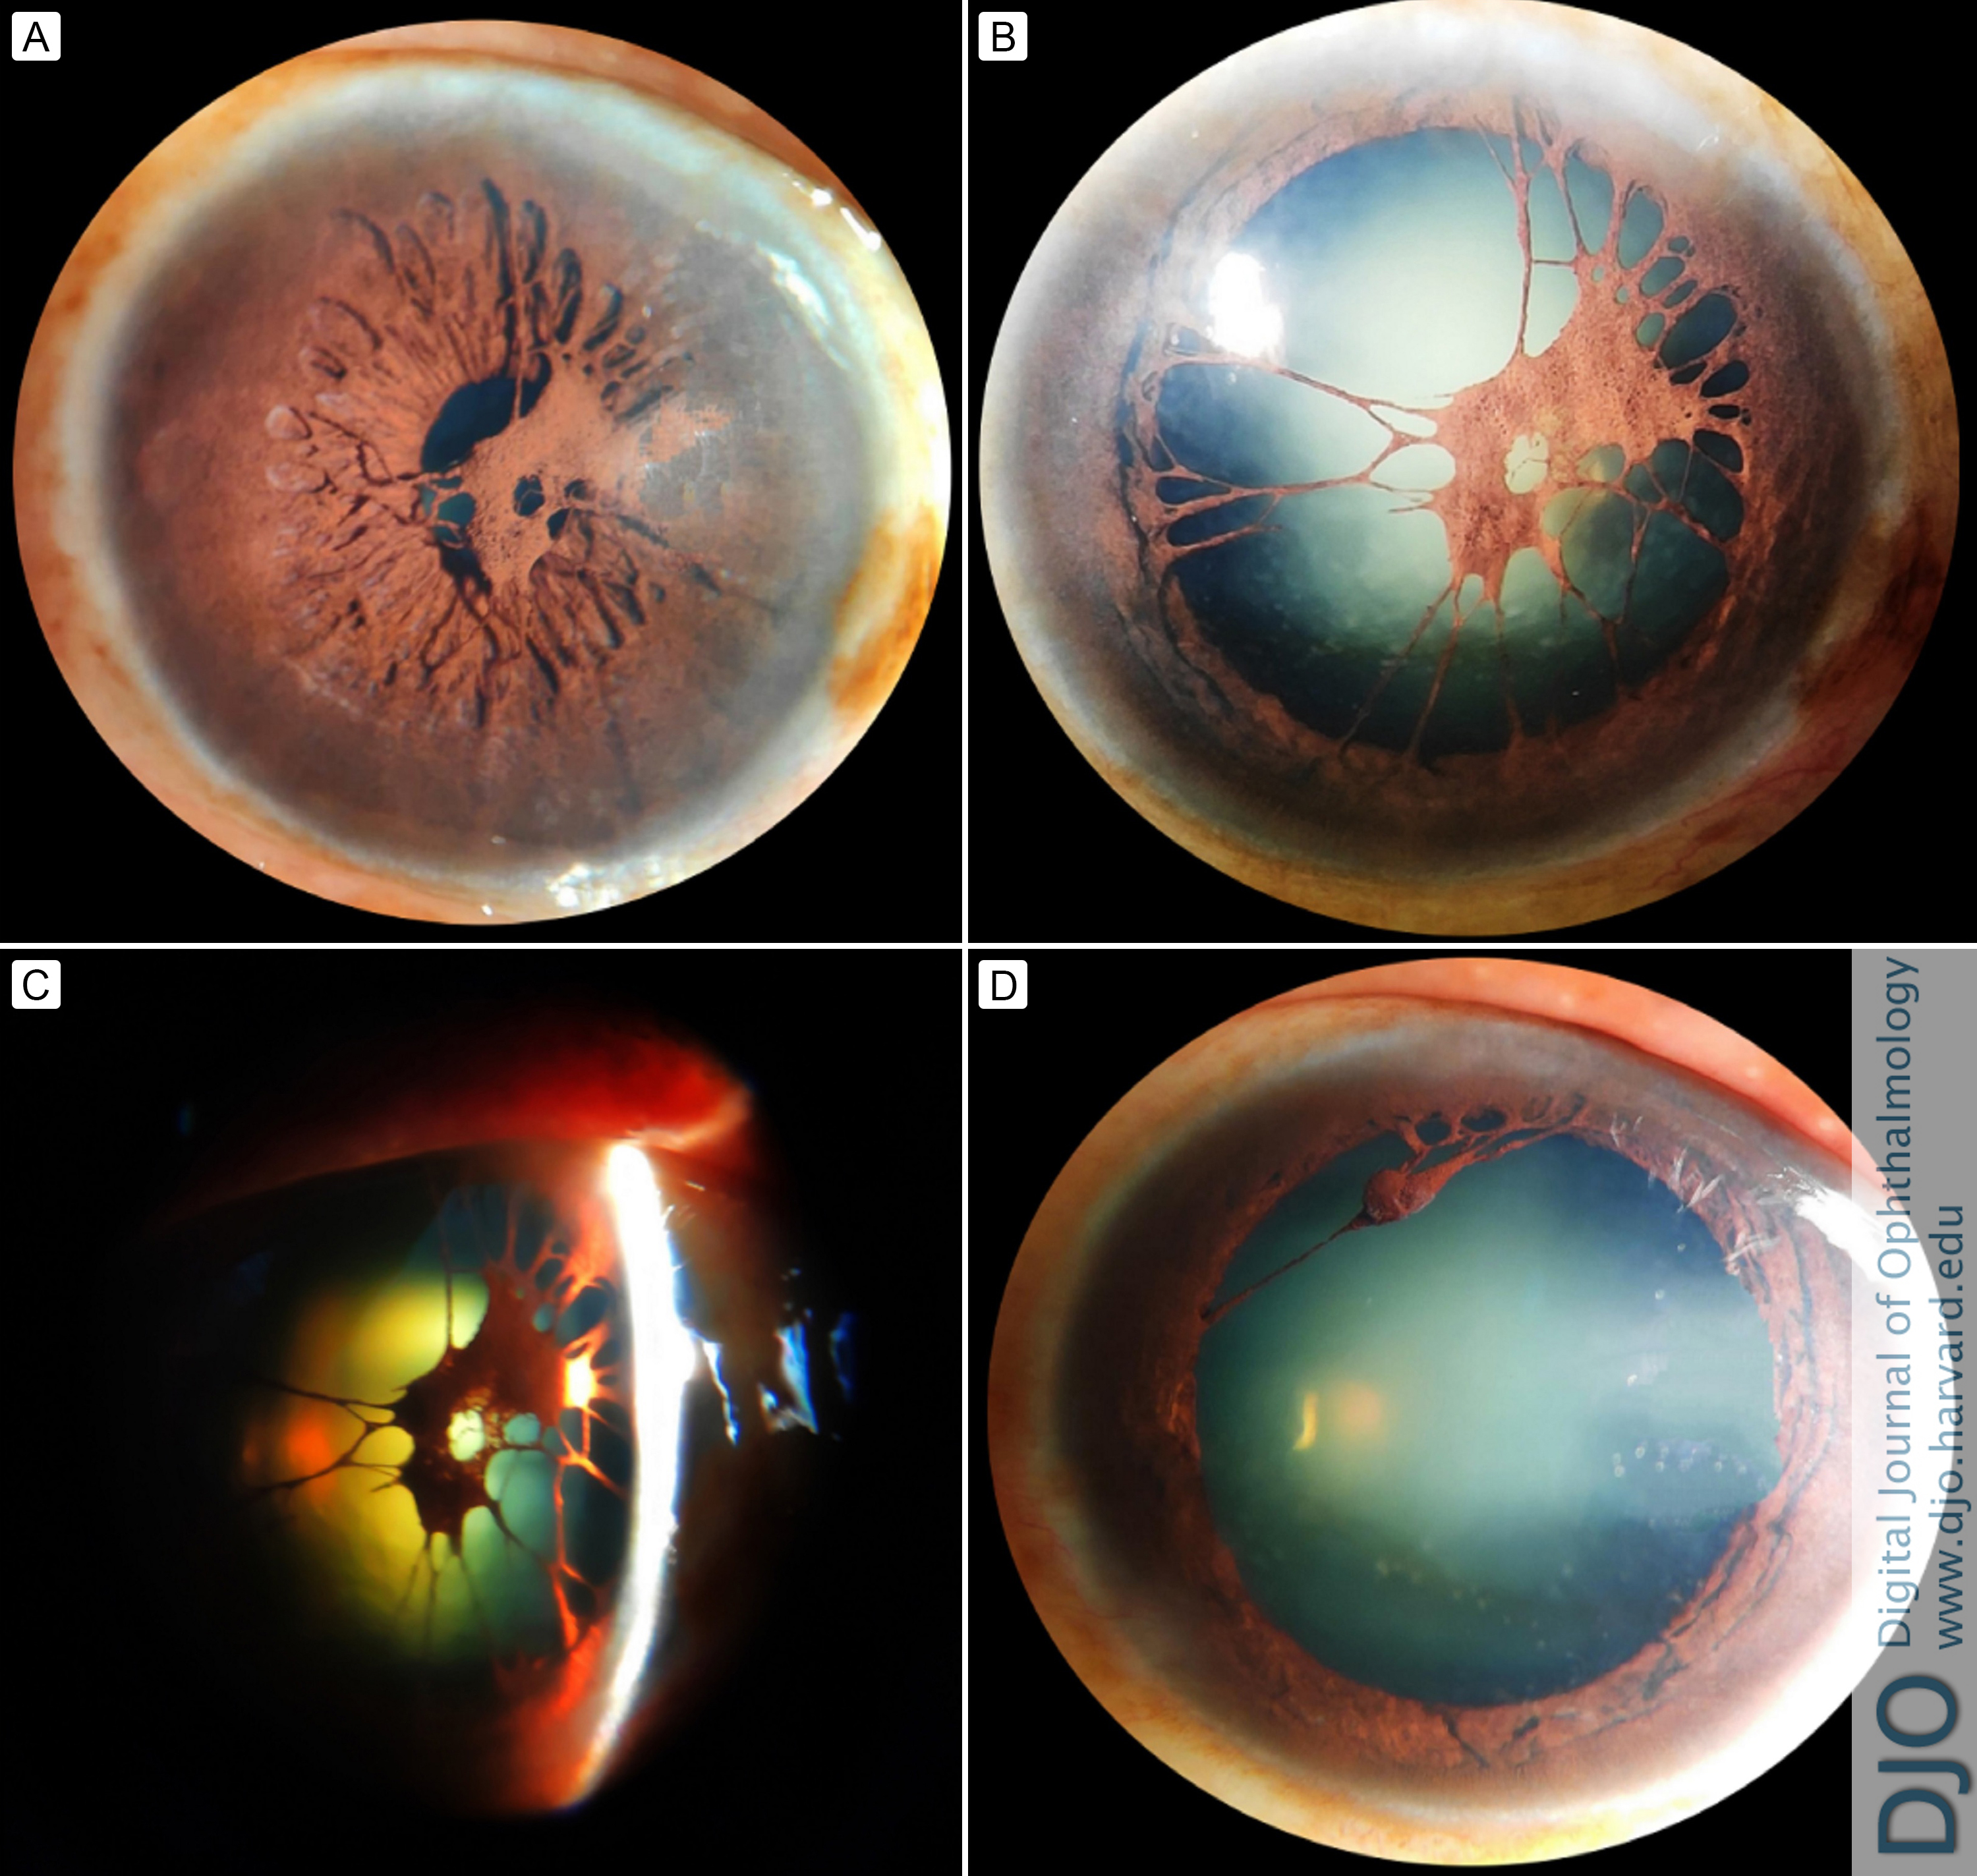 Bilateral persistent pupillary membrane in a 58-year-old woman